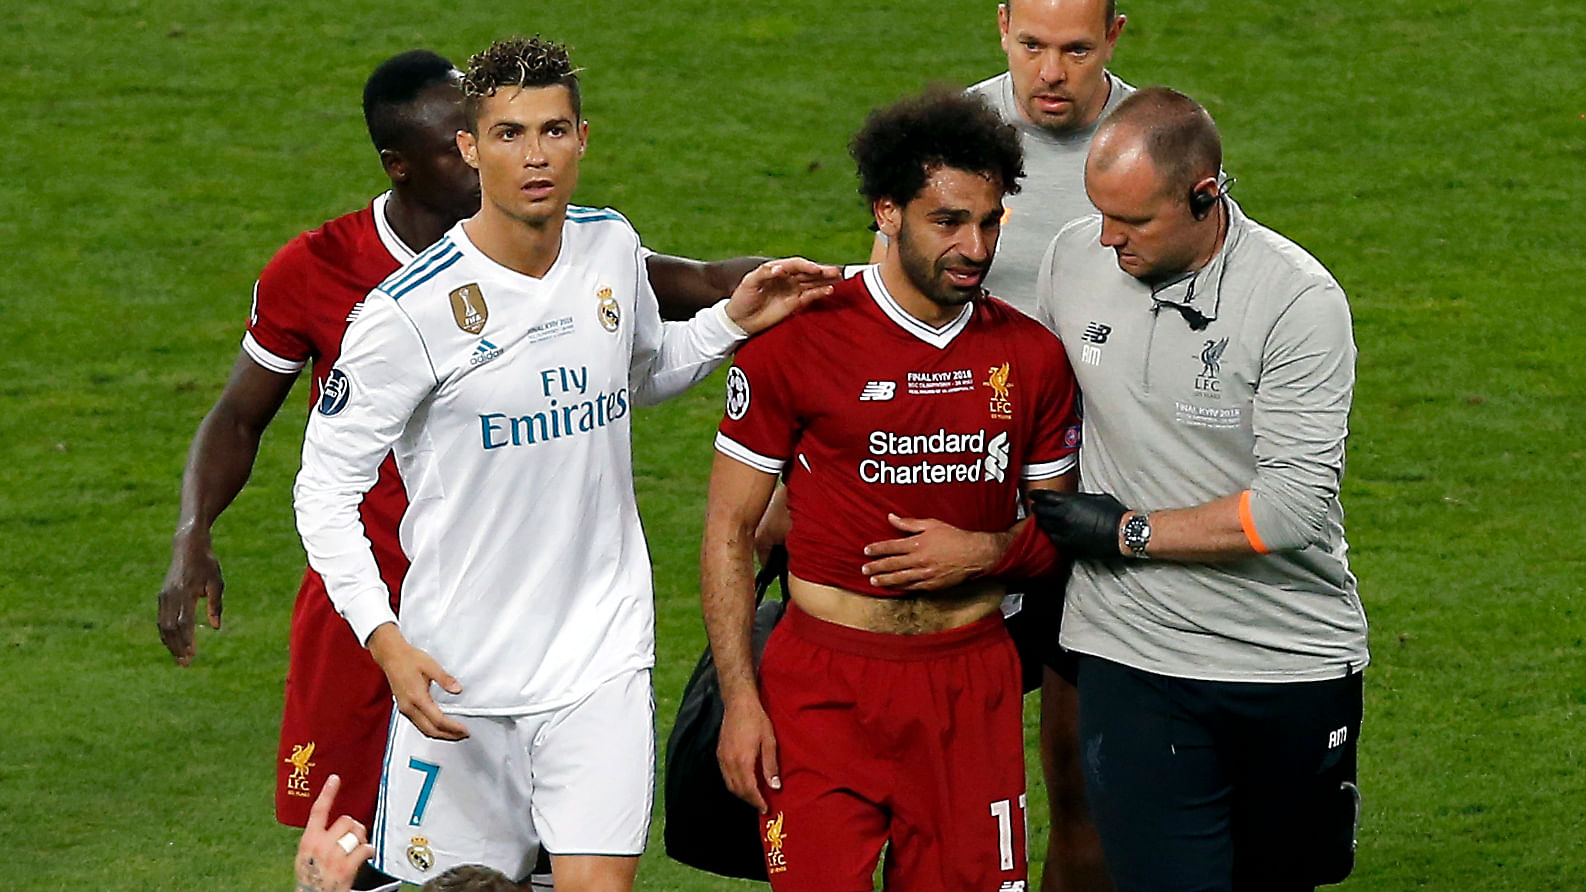 Real Madrid’s Cristiano Ronaldo, left, walks next to Liverpool’s Mohamed Salah, 2nd right, as Salah leaves the pitch during the Champions League Final soccer match between Real Madrid and Liverpool at the Olimpiyskiy Stadium in Kiev, Ukraine, Saturday, May 26, 2018.&nbsp;